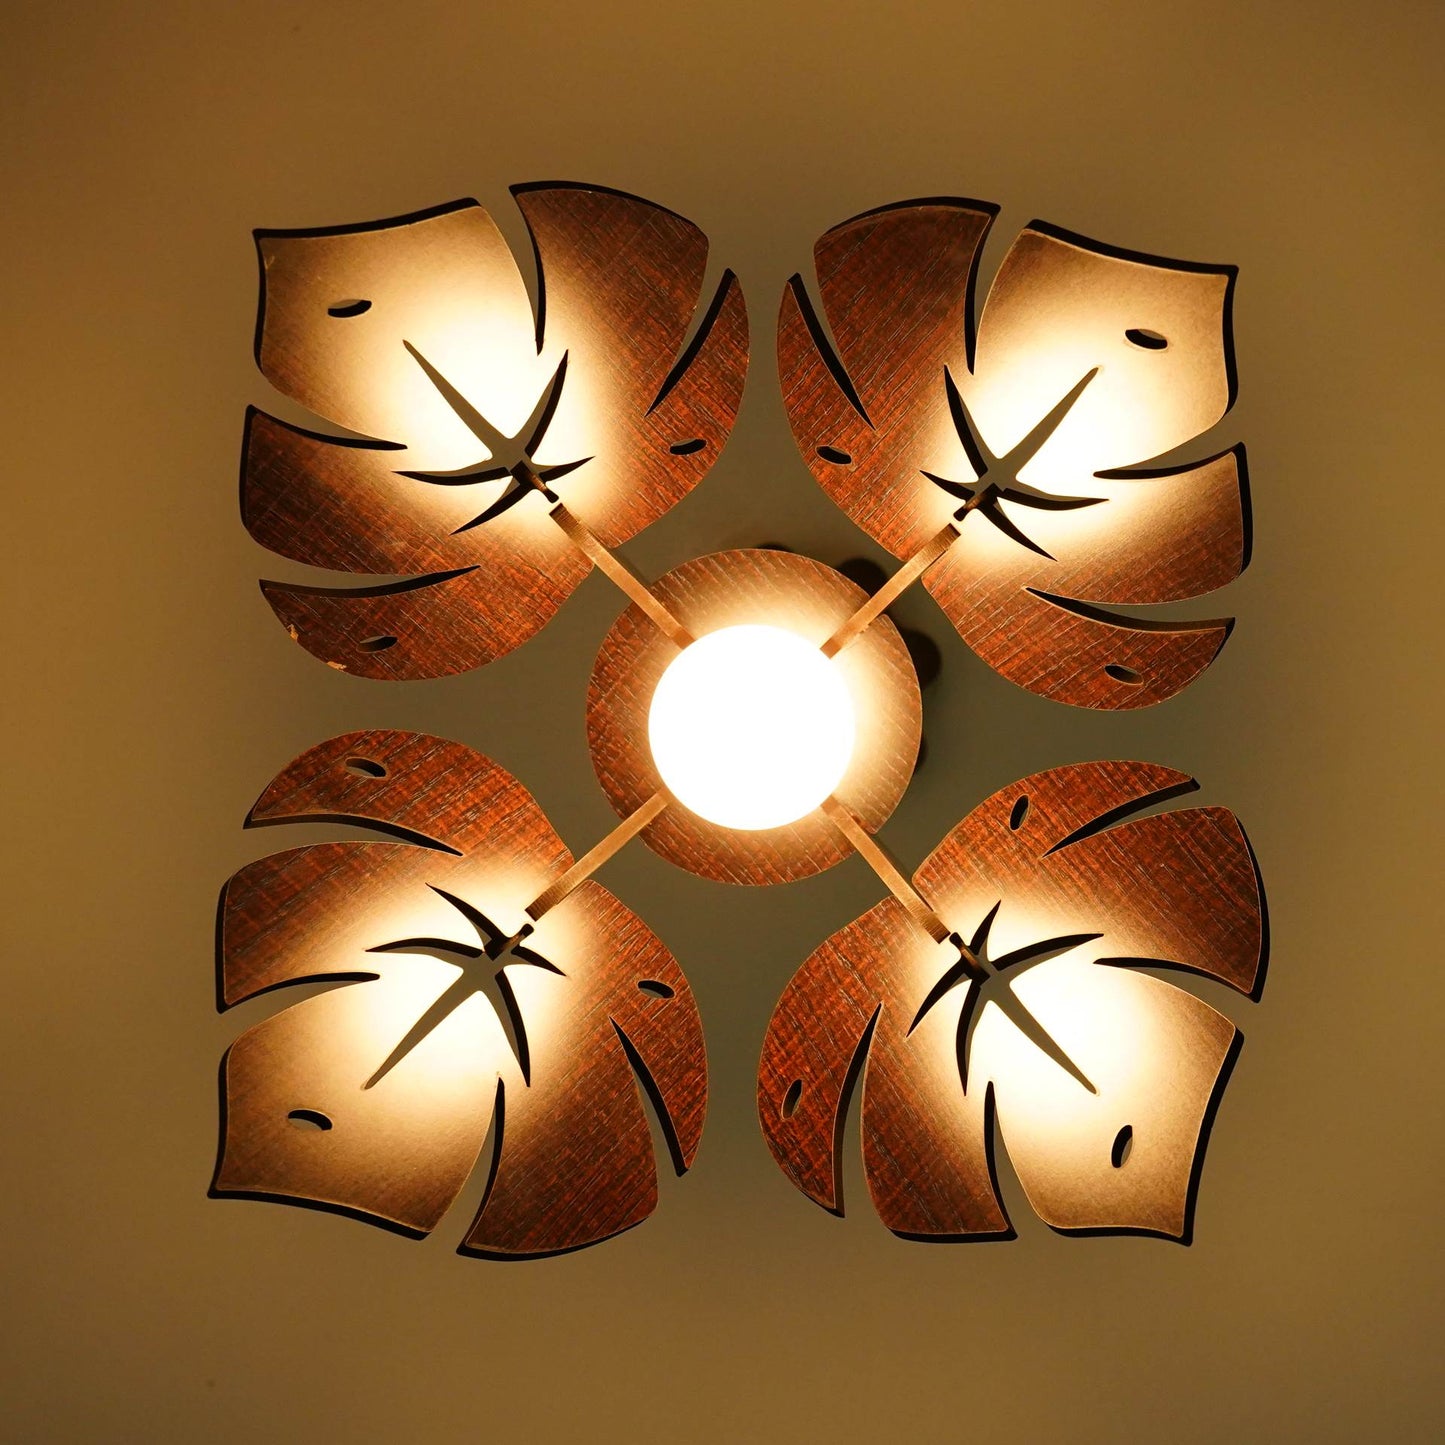 US DZIRE 160 Classic Wooden Ceiling Pendant Light Shade Hand Weave Chandelier Style